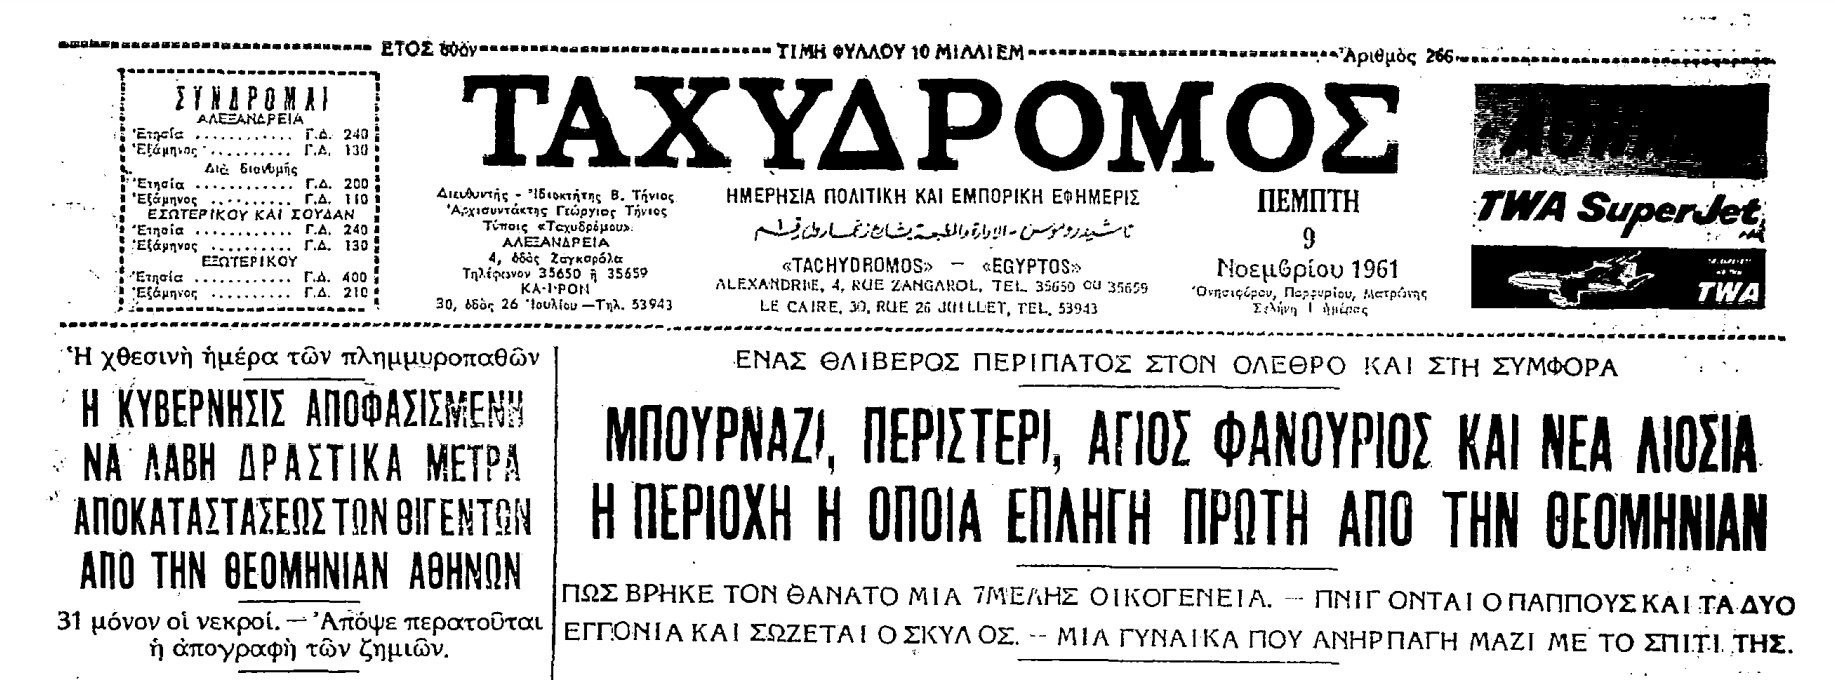 Source: National Library of Greece